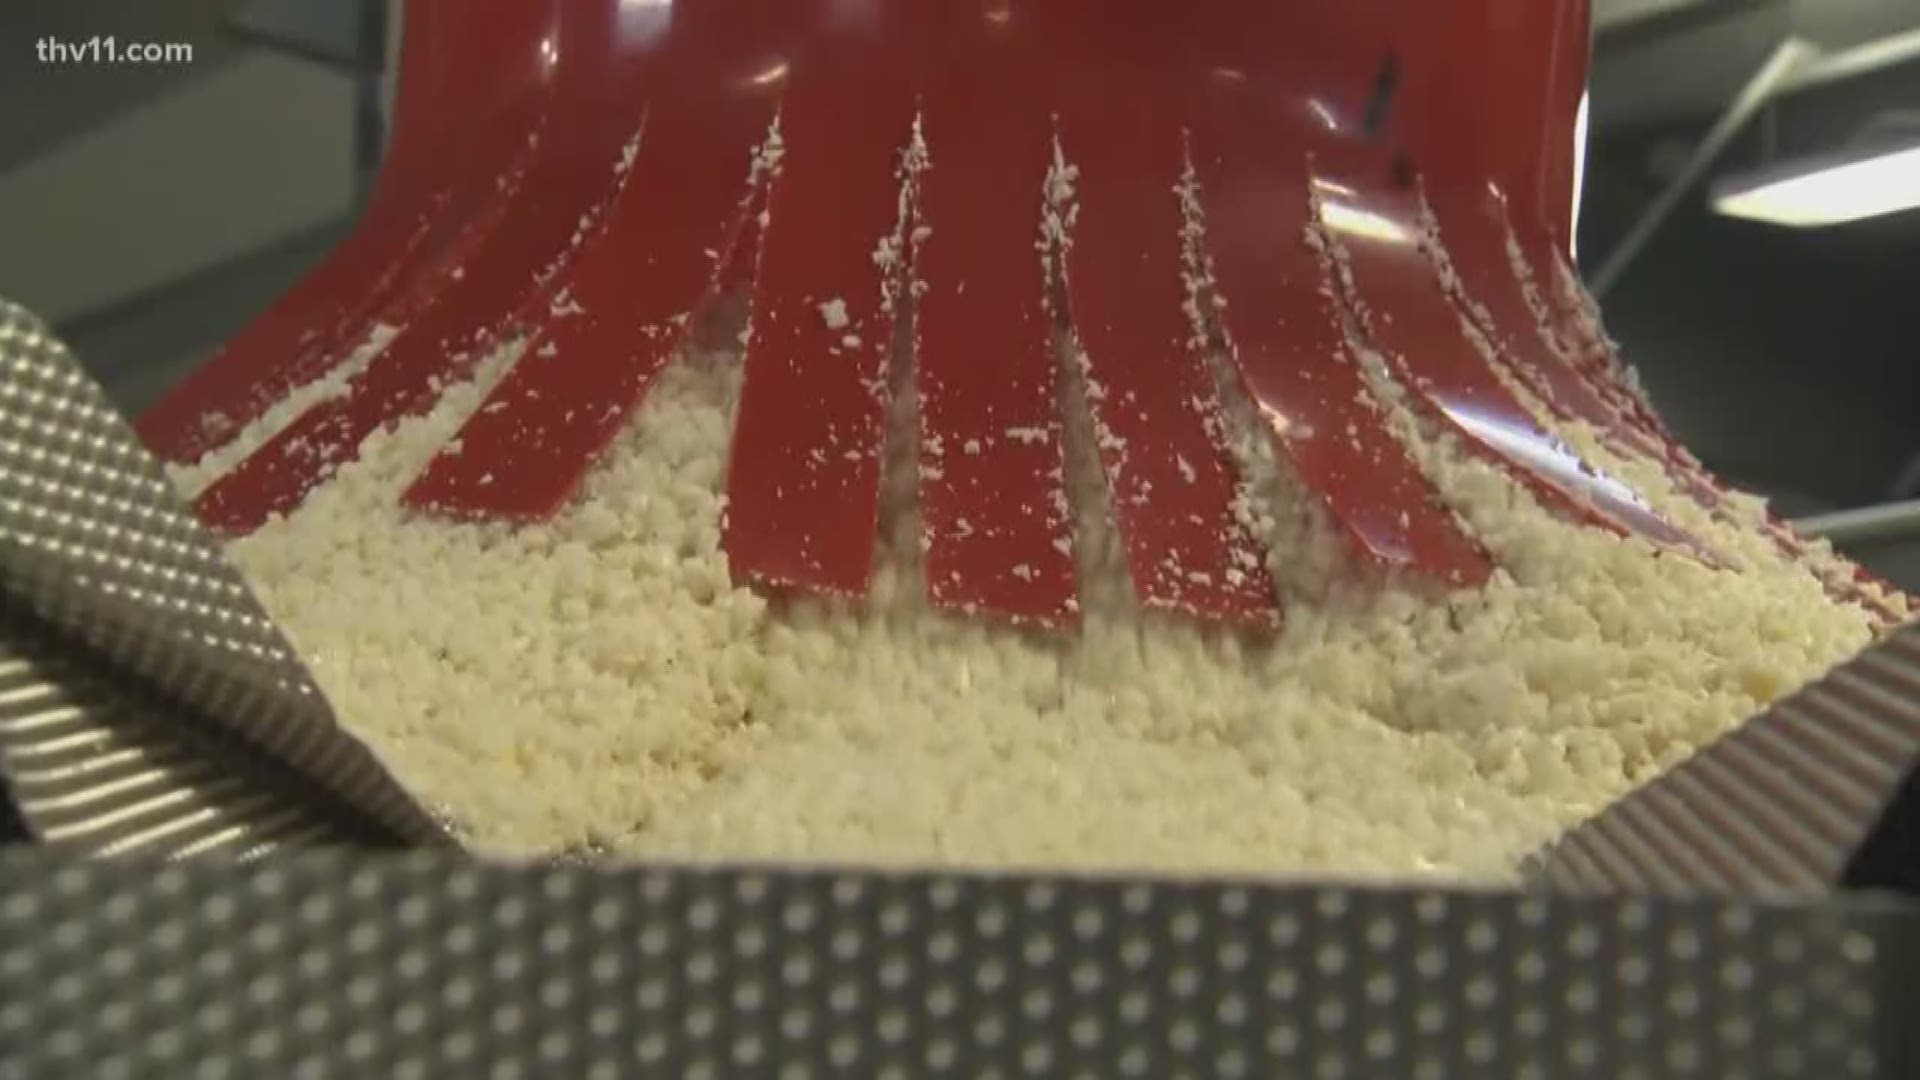 A bill the governor will sign will outlaw anything using the "rice" label that isn't actually rice.